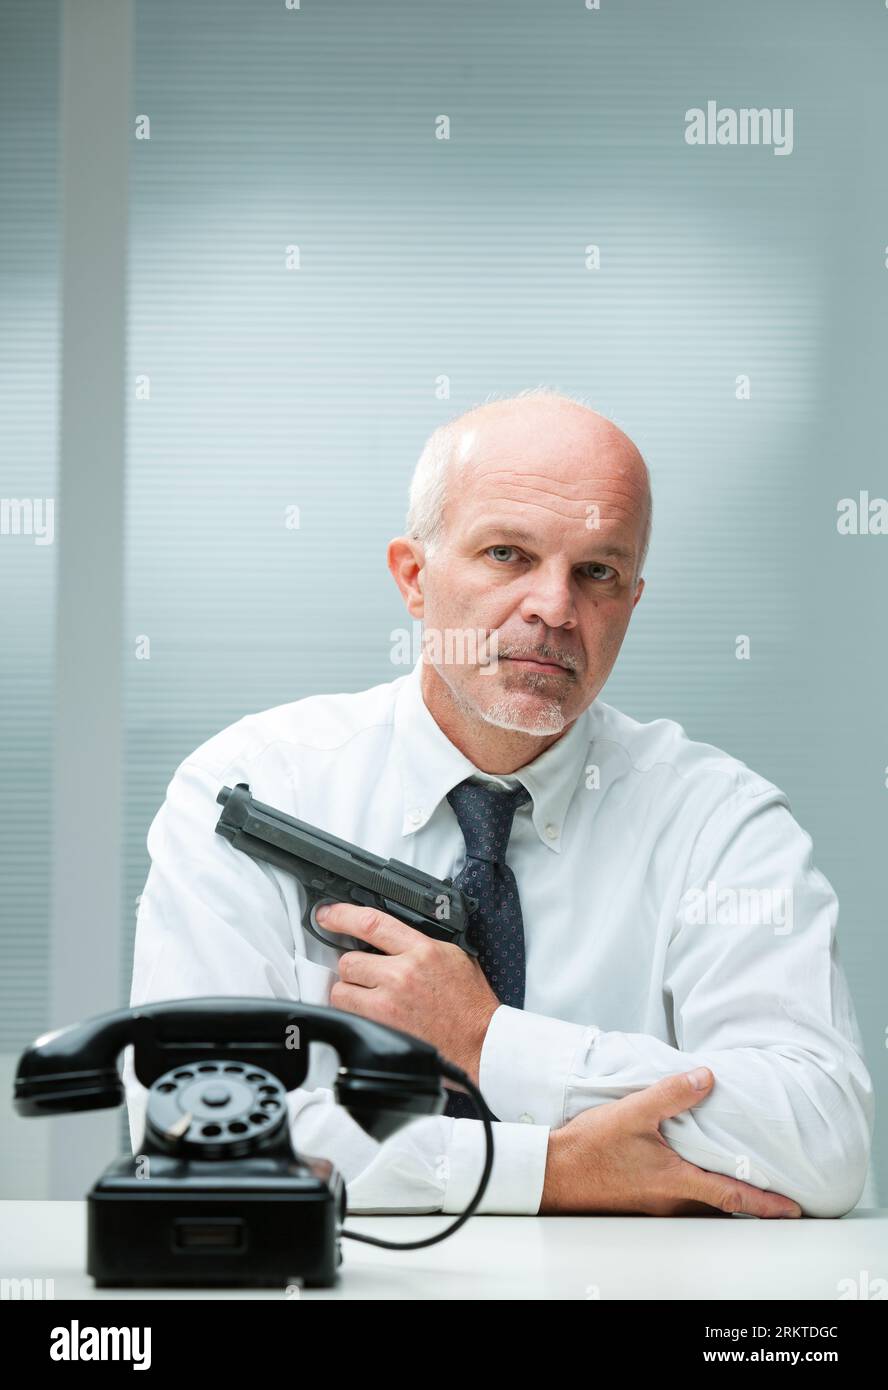 Selective blur between contractor killer's phone and the man with a gun. Concept of a hitman waiting in a seemingly governmental office. Essential yet Stock Photo